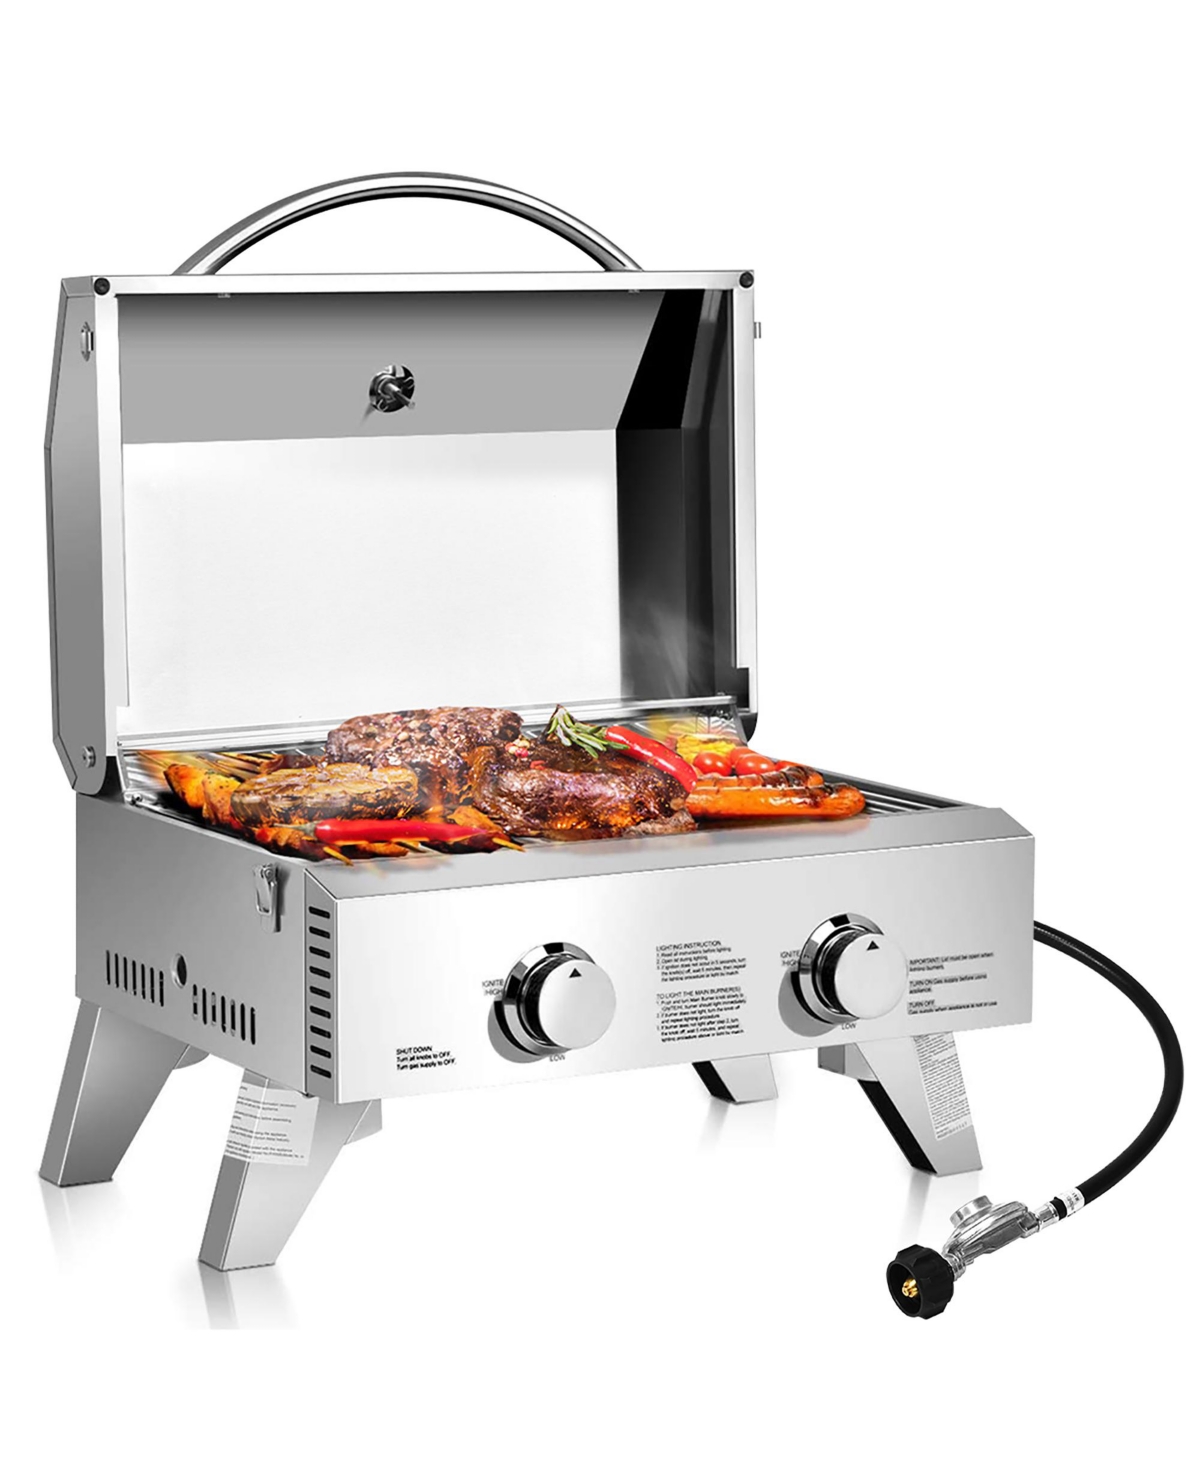 20,000 Btu Stainless Steel Propane Grill for Outdoor - Silver